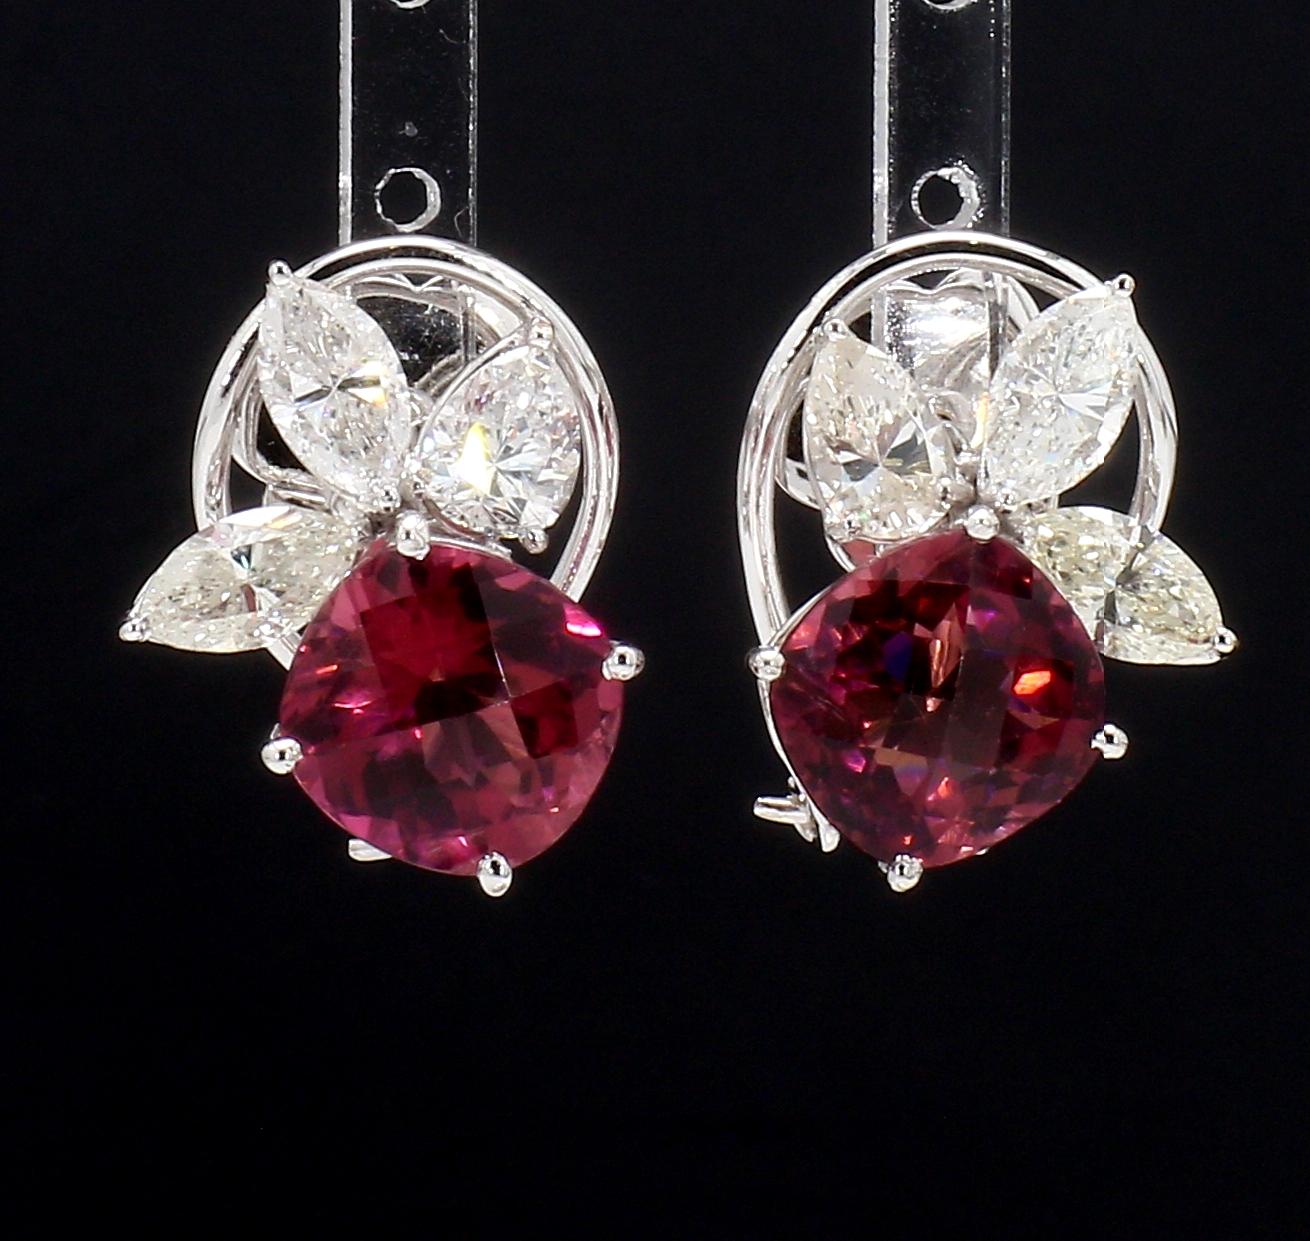 3Ct Marquise Diamonds with Pink Tourmaline Earrings in White Gold Hallmarked